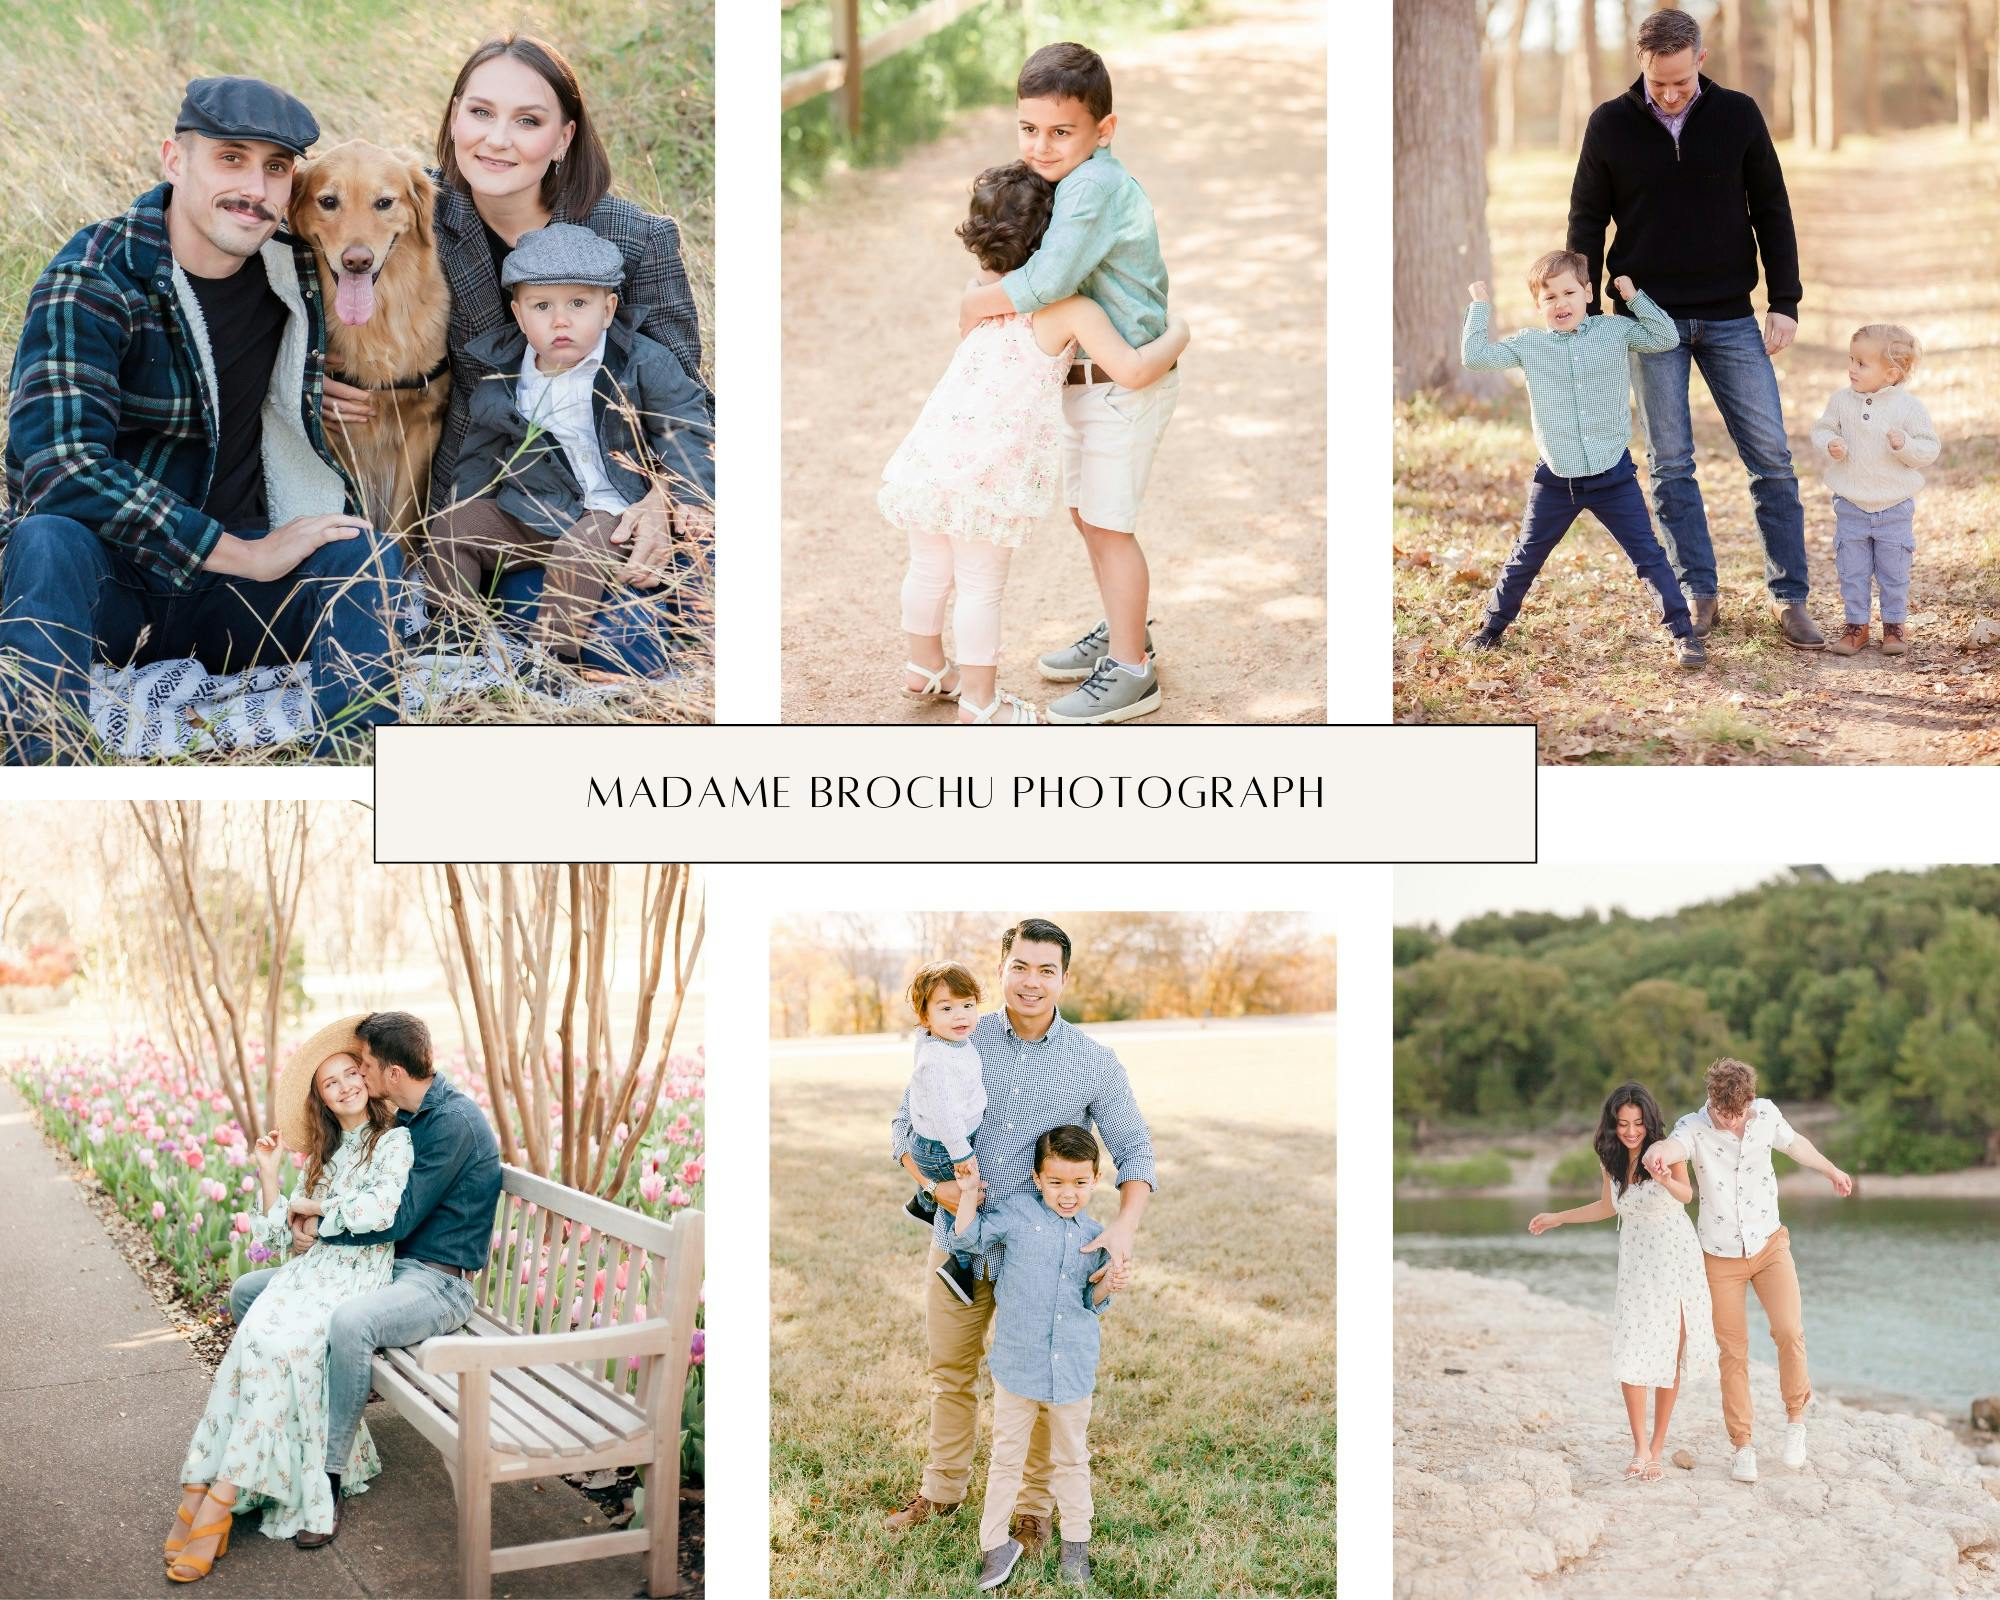 Hourly Family Sessions start at 